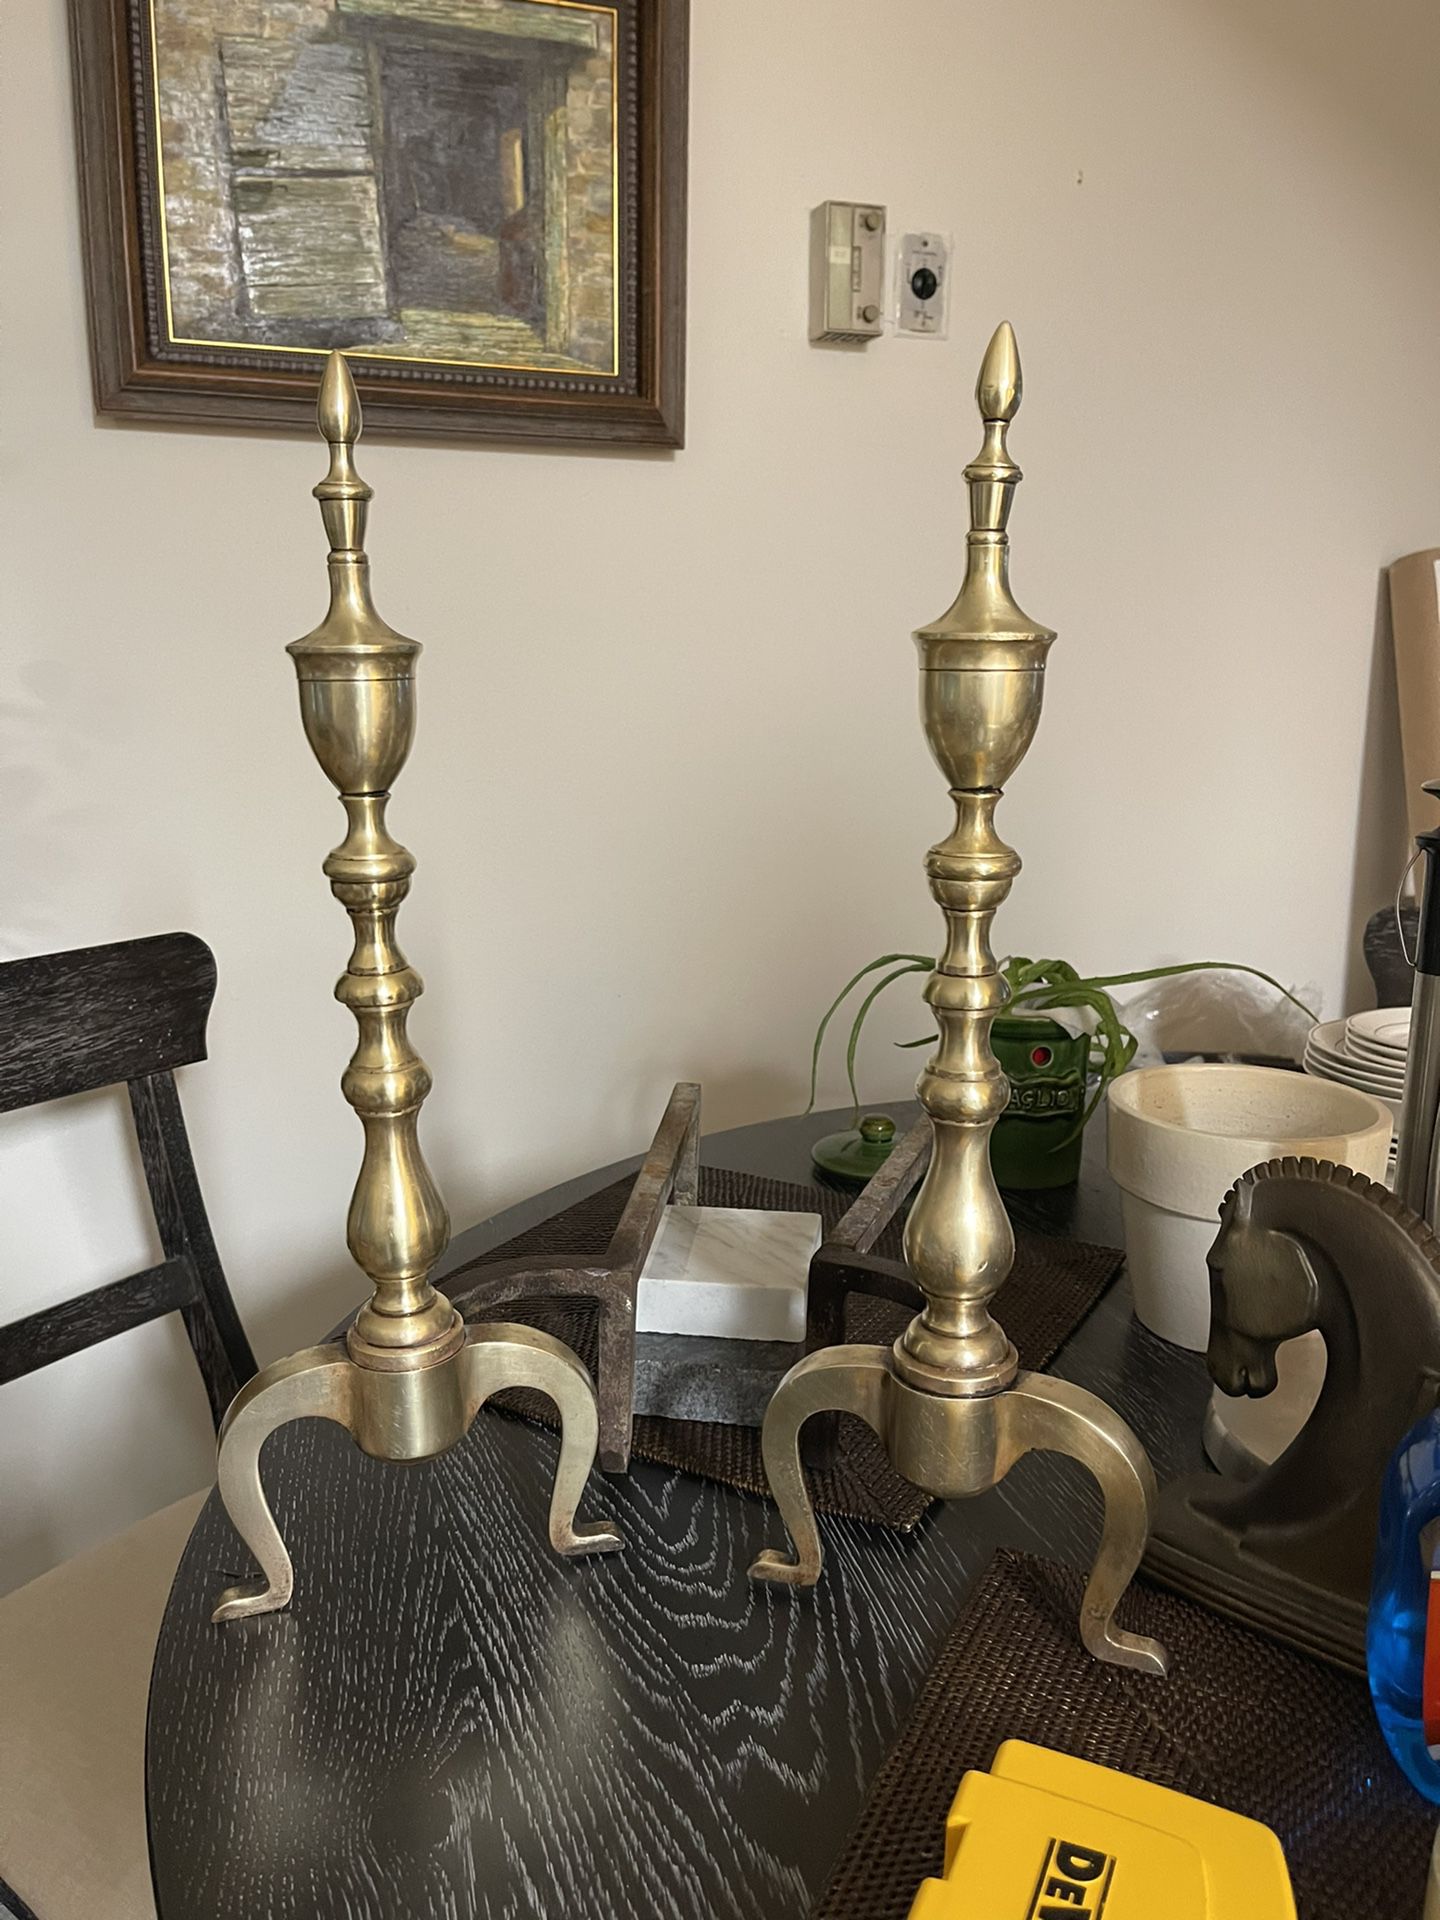 Antique Fireplace Federal Brass Andirons From Early 19th Century